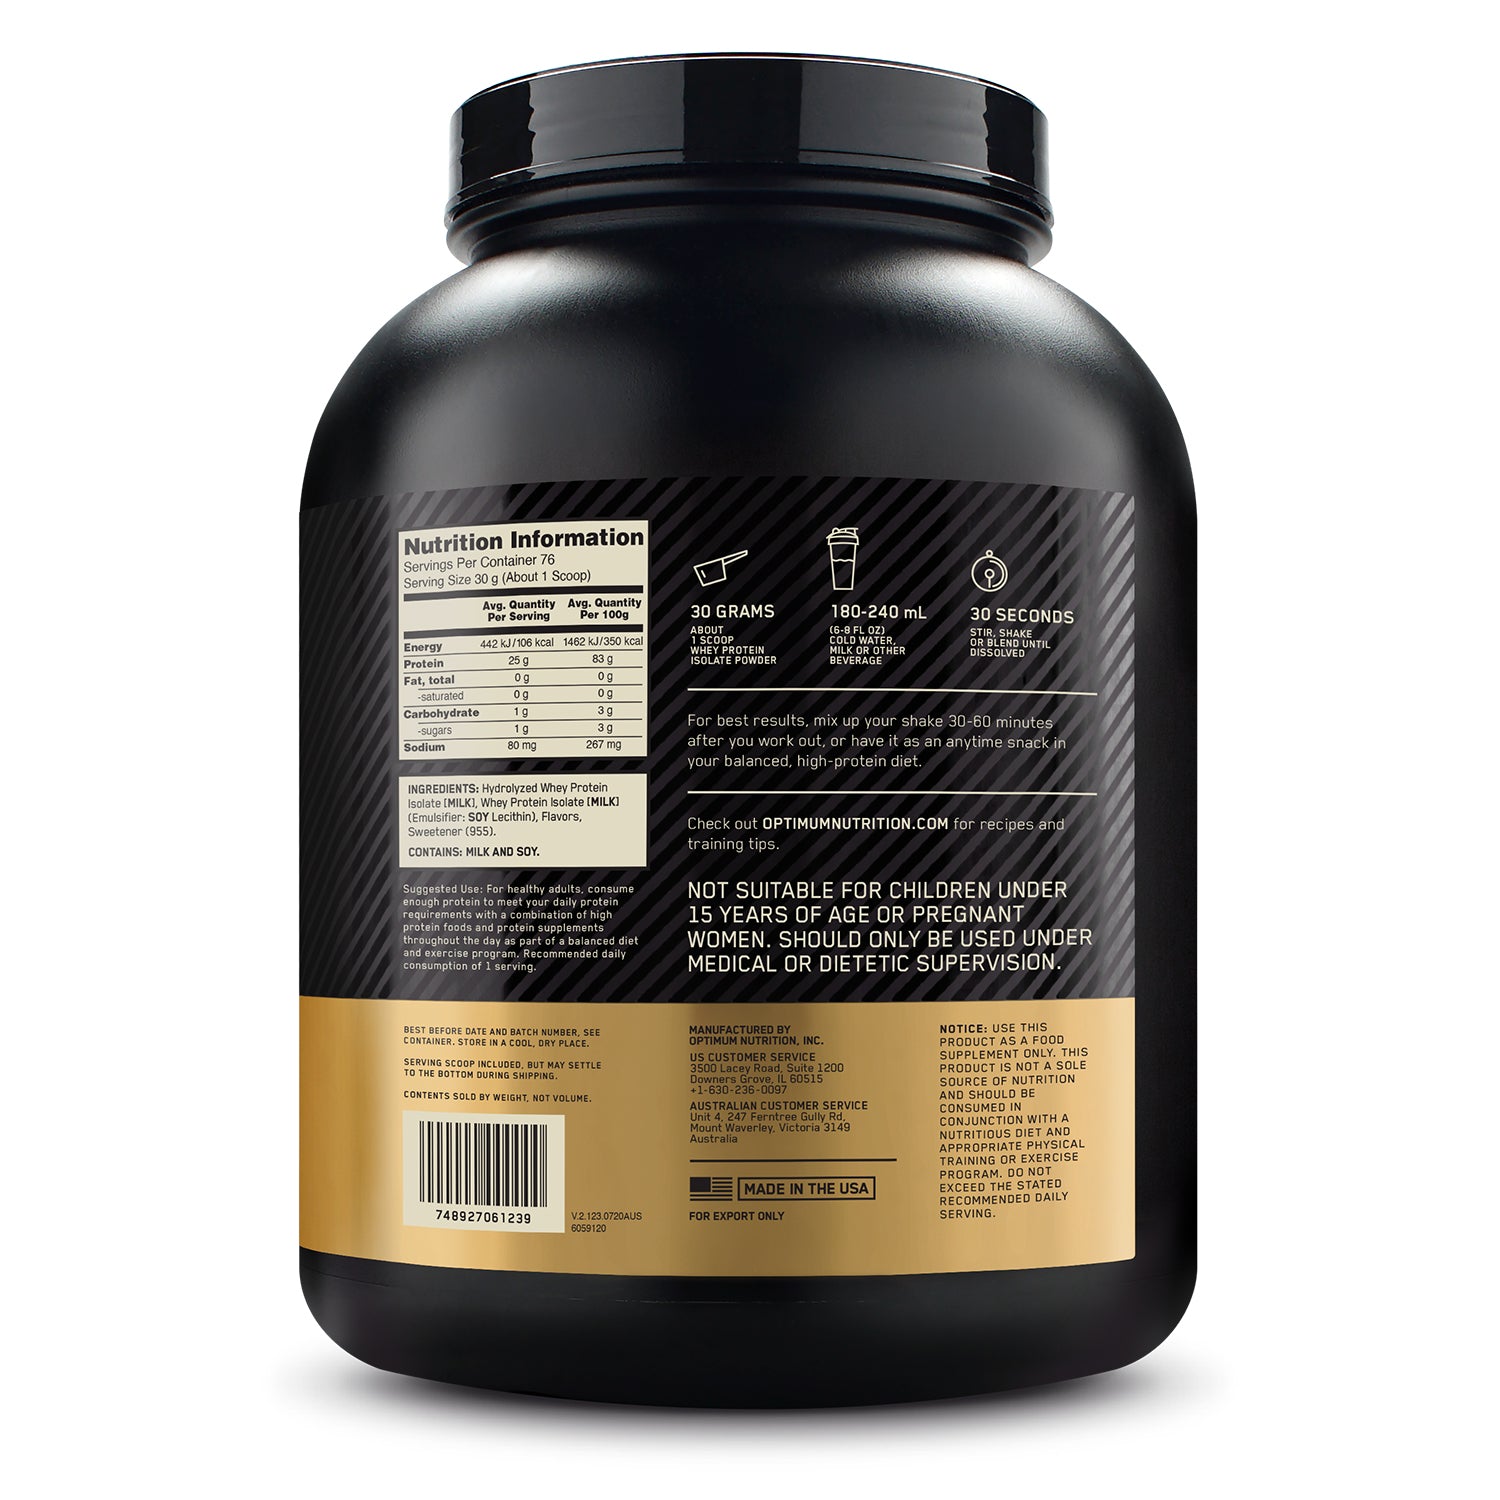 Gold Standard 100 Isolate Ultra Filtered Whey Protein - Vanilla 228 Kgs (5 lbs)